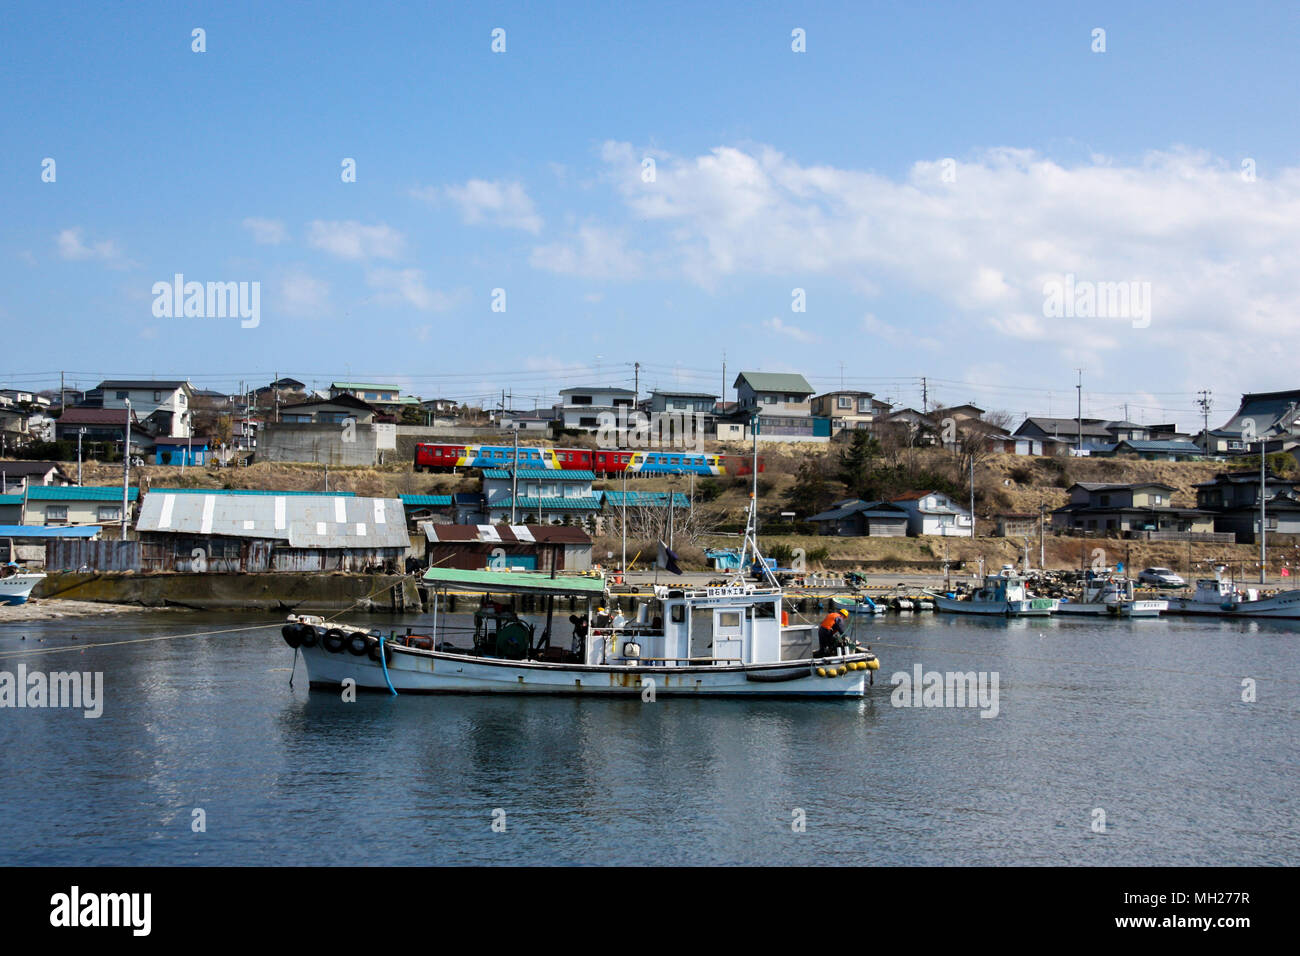 Japanese fishing vessel comes to port Stock Photo